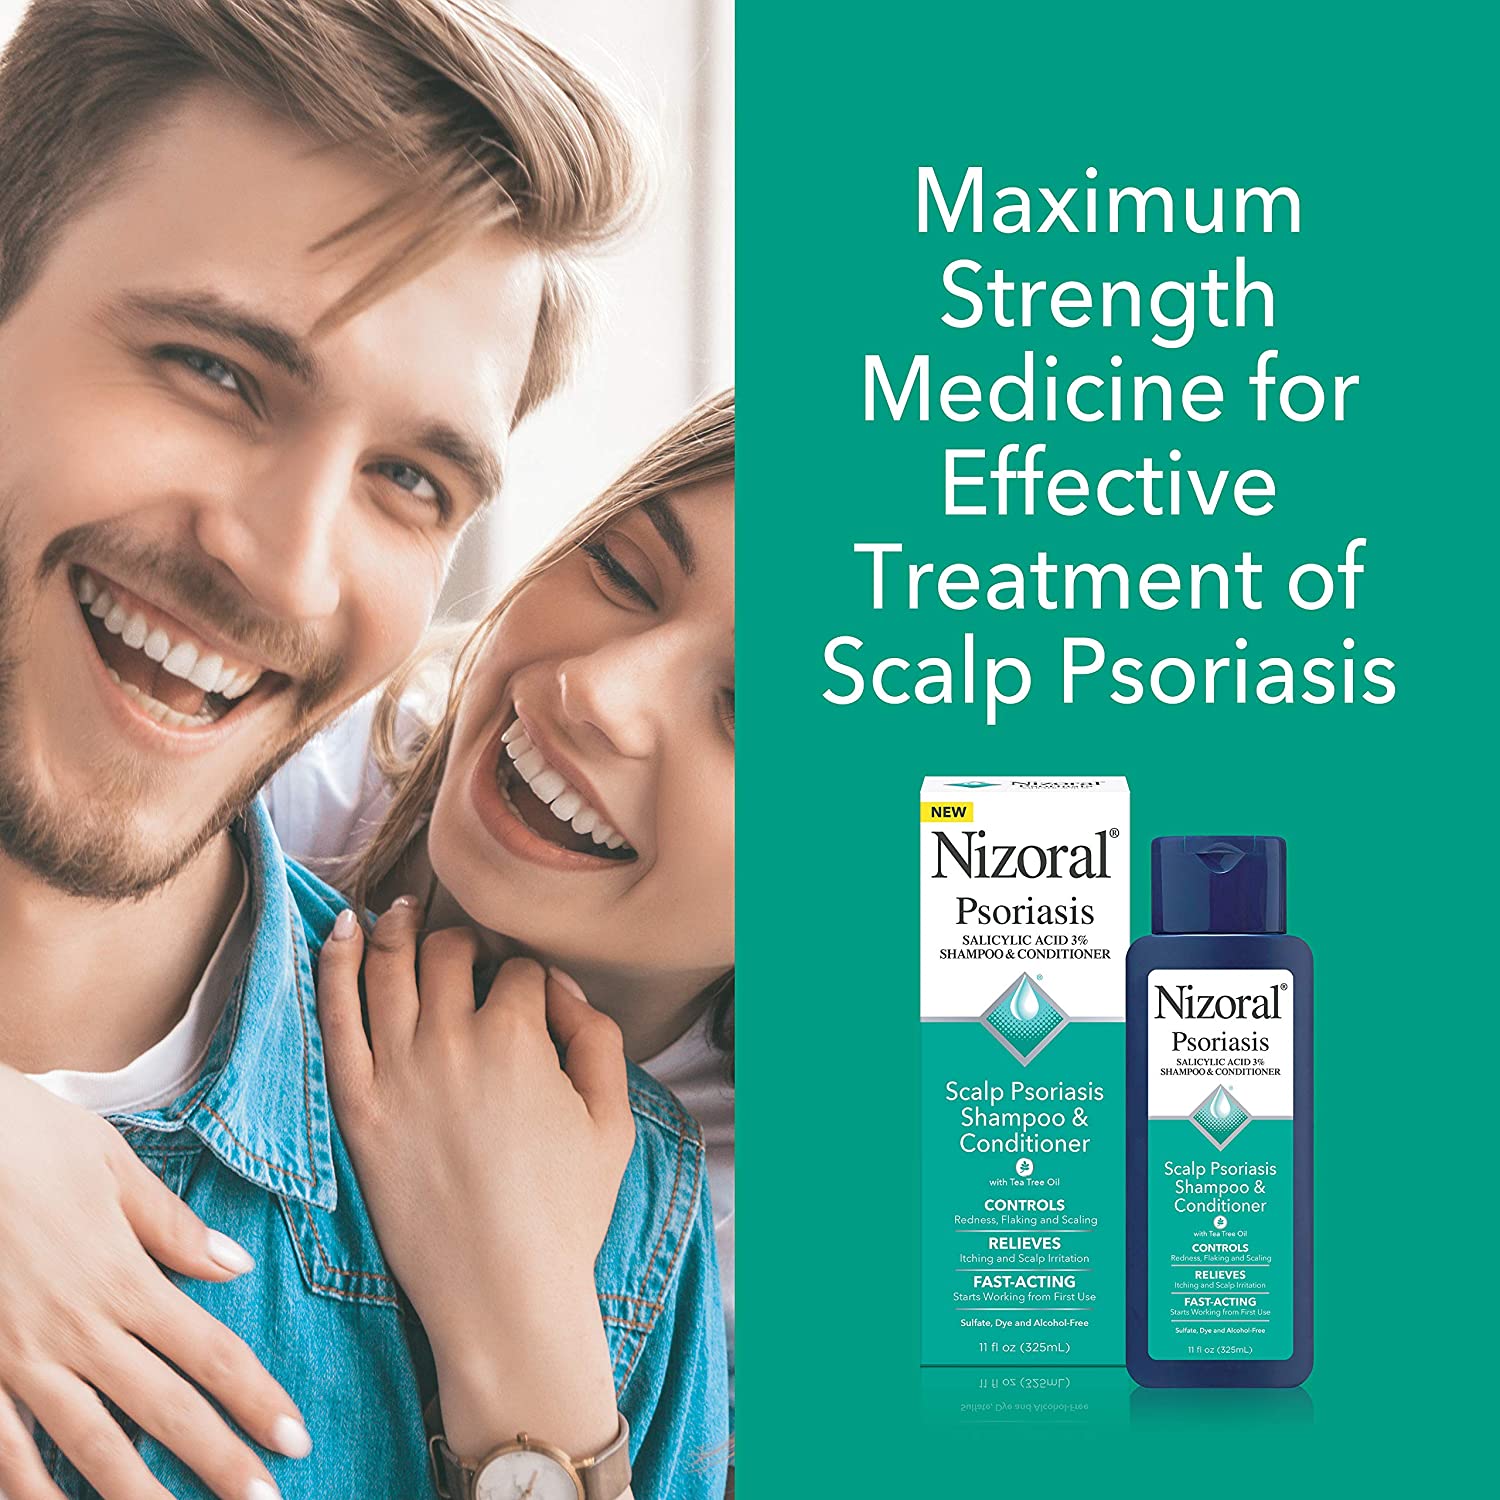 Nizoral Scalp Psoriasis & Conditioner (Relieves Itchy Dry Mountainside Medical Equipment